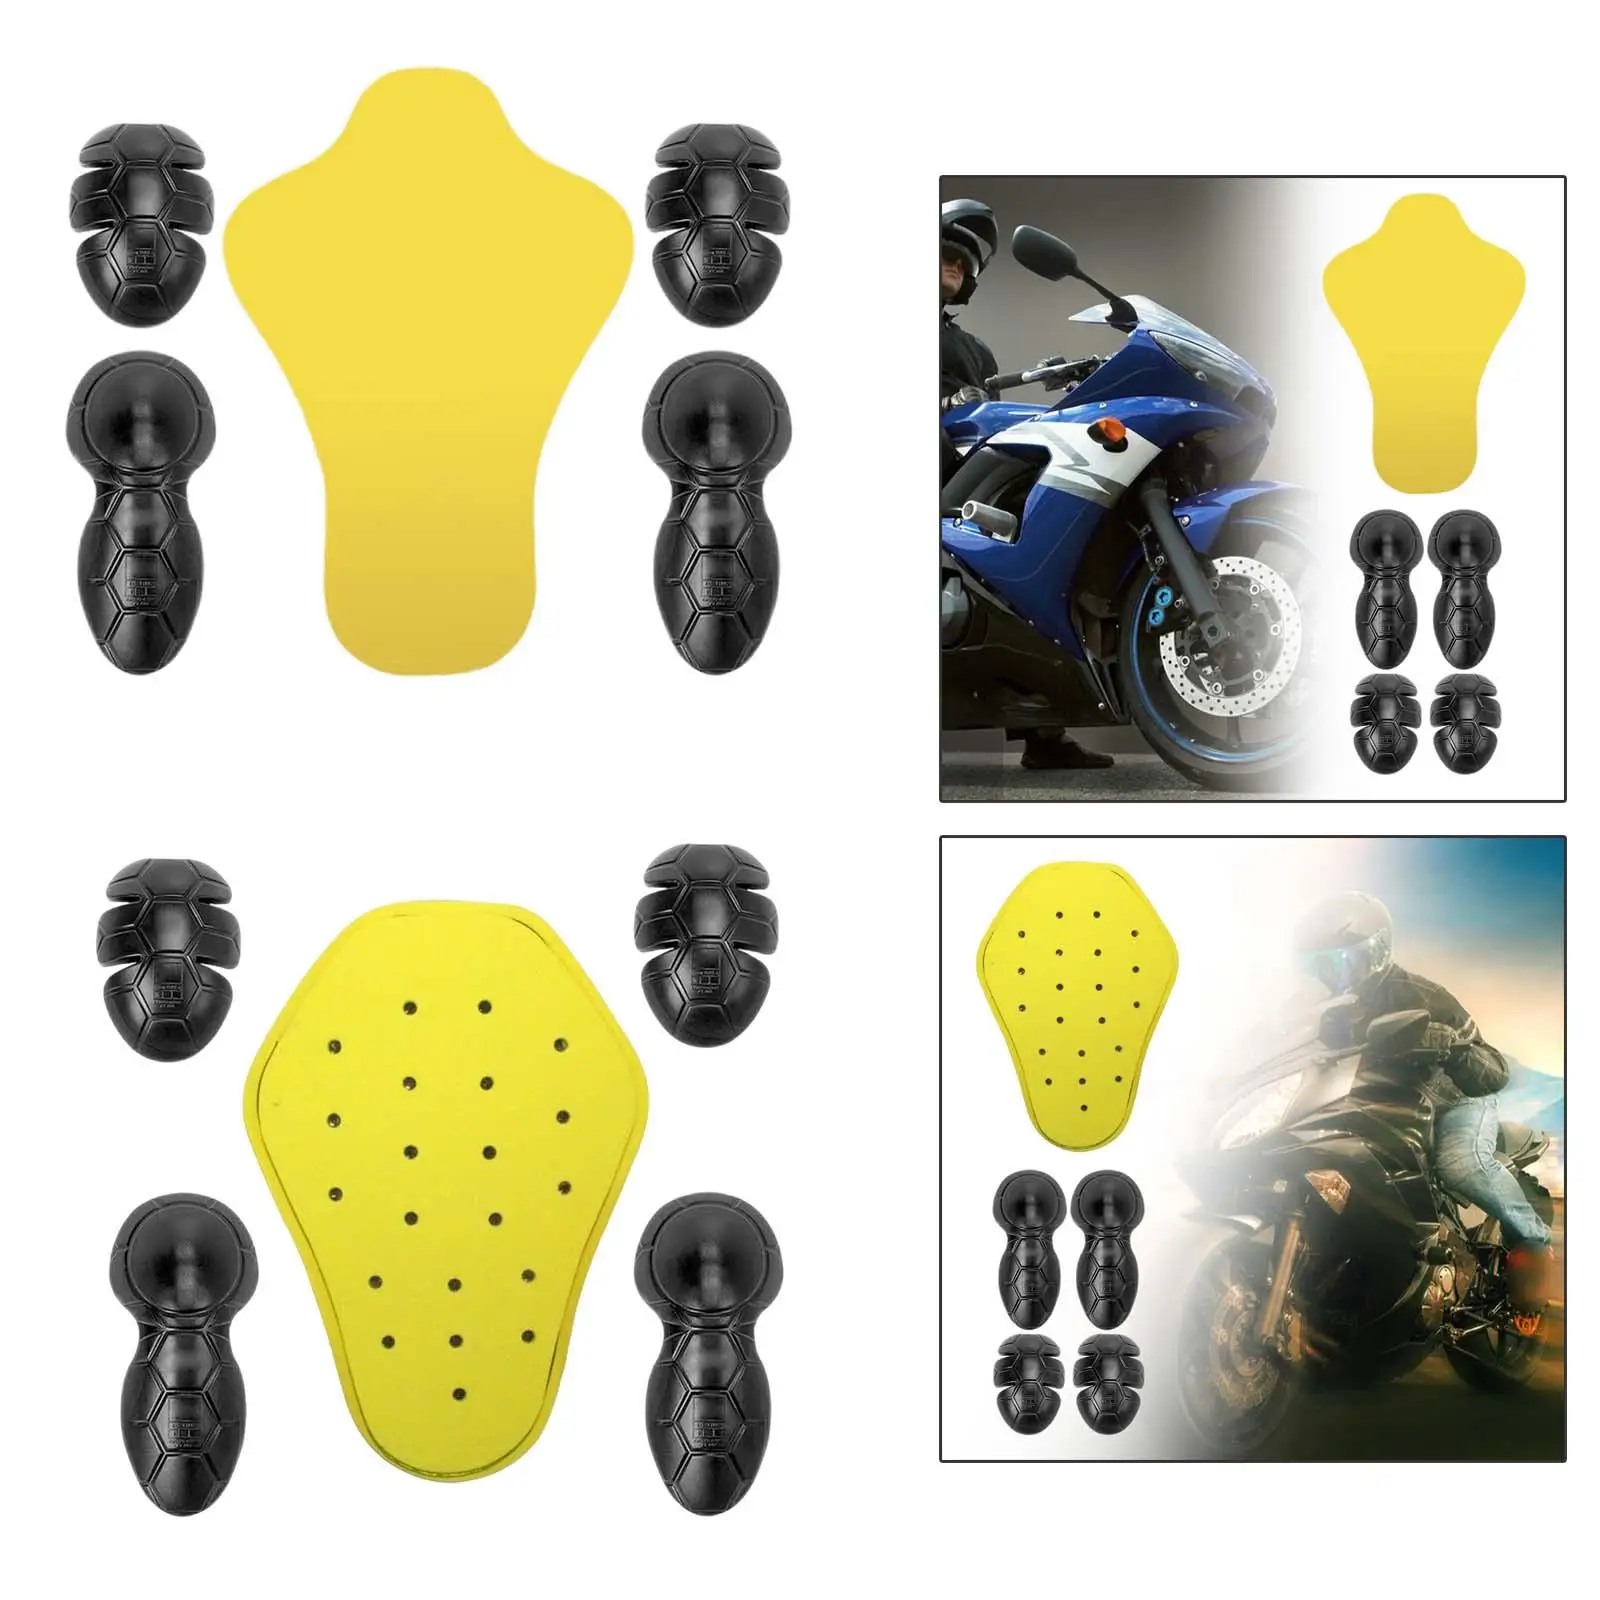 5 Pieces Removable Motorcycle Armour Set Elbow Knee Back Pad Clothing Protector for Riding Outdoor Cycling for Men Women